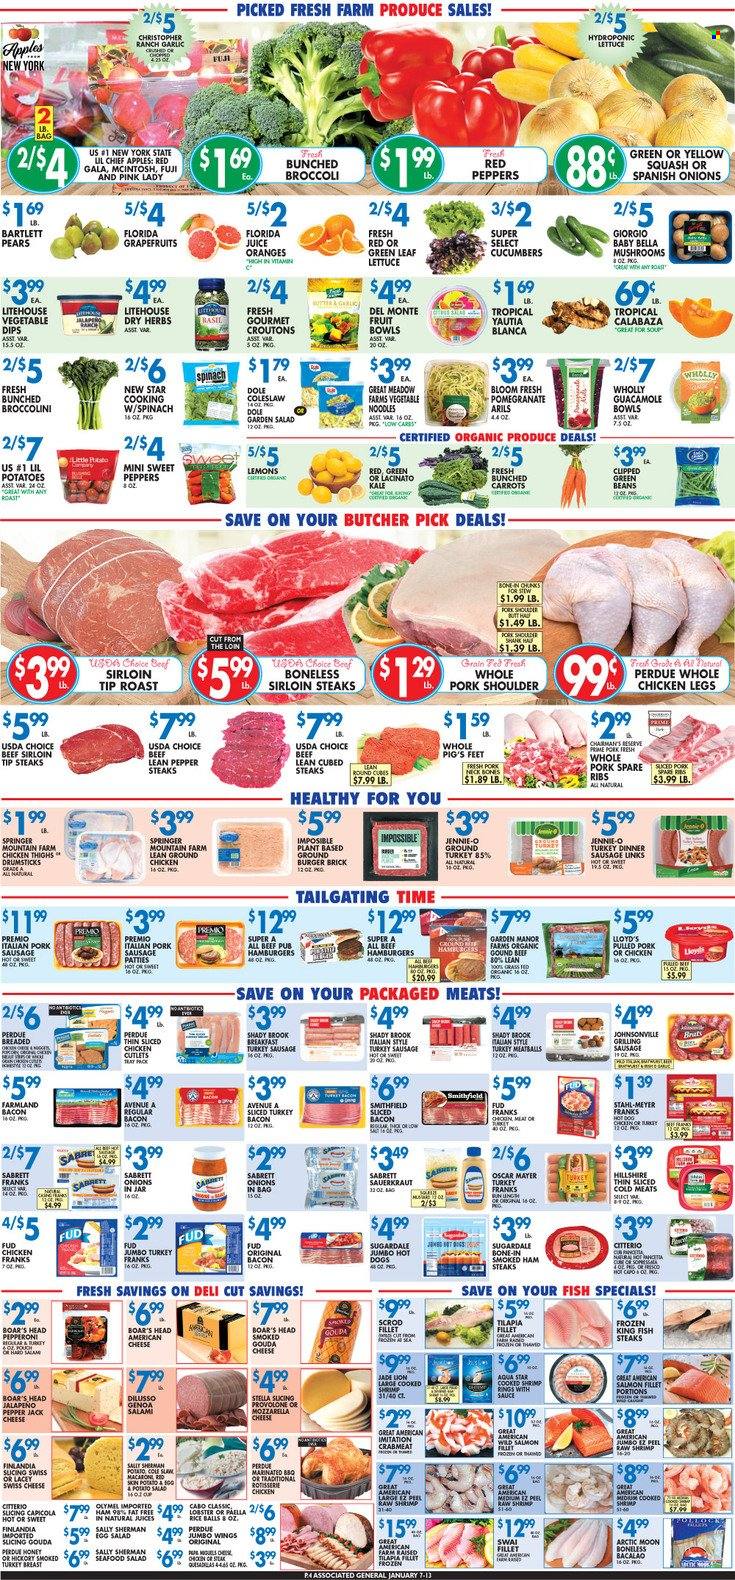 thumbnail - Associated Supermarkets Flyer - 01/07/2022 - 01/13/2022 - Sales products - mushrooms, Bartlett pears, beans, broccoli, carrots, cucumber, green beans, kale, potatoes, Dole, jalapeño, broccolini, yellow squash, red peppers, apples, Gala, grapefruits, pears, oranges, Pink Lady, crab meat, lobster, salmon, salmon fillet, tilapia, seafood, fish, king fish, shrimps, fish steak, swai fillet, coleslaw, hot dog, meatballs, macaroni, soup, hamburger, noodles, Perdue®, pulled pork, Sugardale, bacon, salami, sliced turkey, turkey bacon, ham, smoked ham, Johnsonville, Oscar Mayer, sausage, pork sausage, pepperoni, chicken frankfurters, guacamole, seafood salad, ham steaks, american cheese, gouda, swiss cheese, Pepper Jack cheese, cheese, Provolone, eggs, paella, croutons, sauerkraut, esponja, herbs, juice, ground chicken, ground turkey, whole chicken, chicken cutlets, chicken legs, beef meat, beef sirloin, steak, sirloin steak, pork meat, pork shoulder, pomegranate, lemons. Page 4.